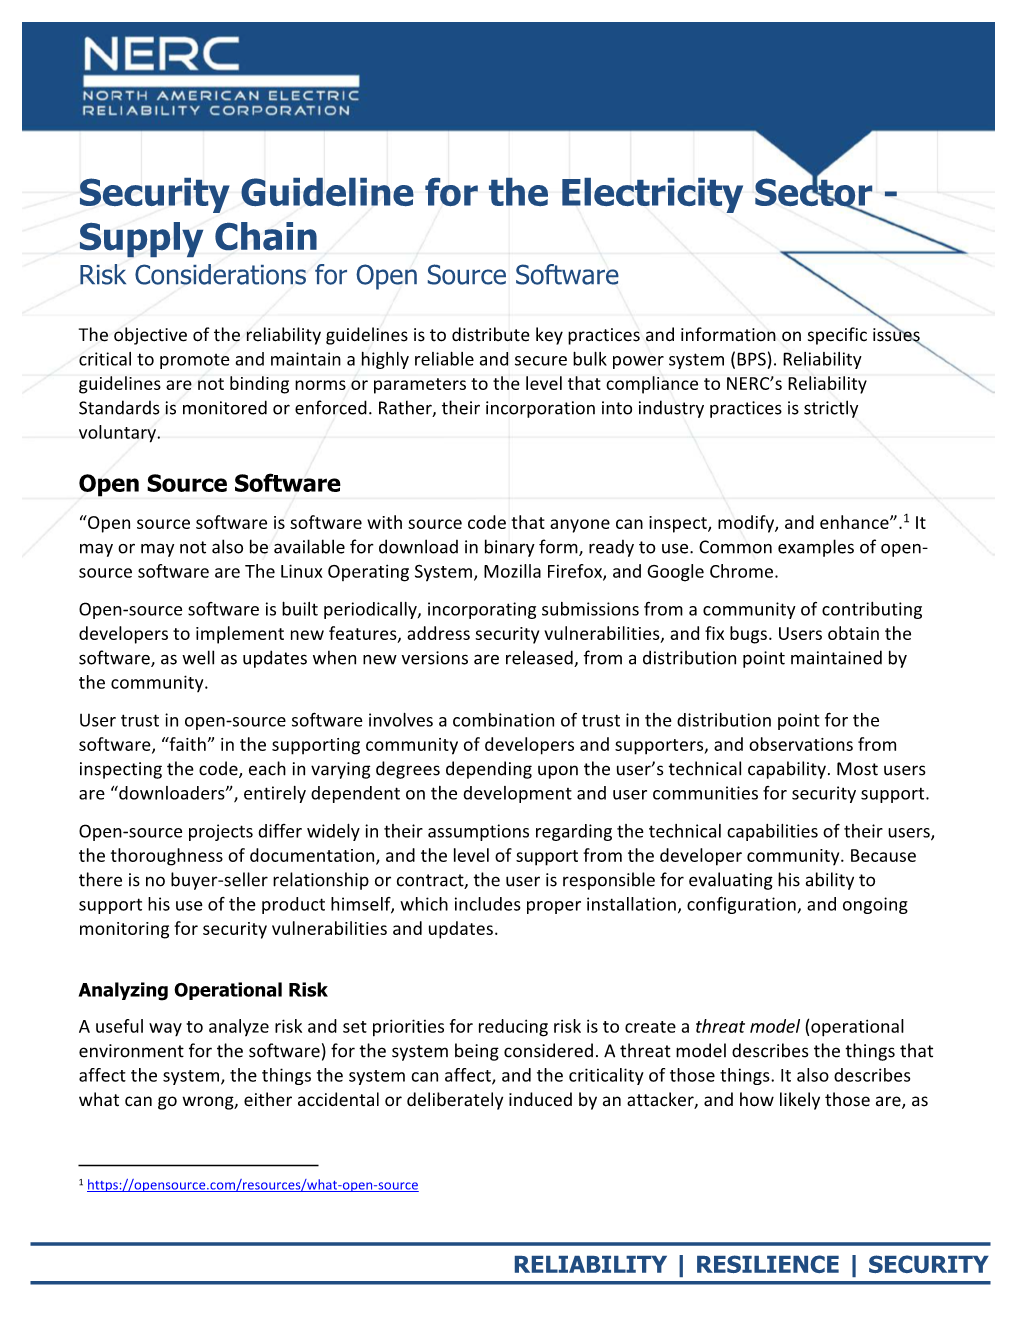 Security Guideline for the Electricity Sector - Supply Chain Risk Considerations for Open Source Software